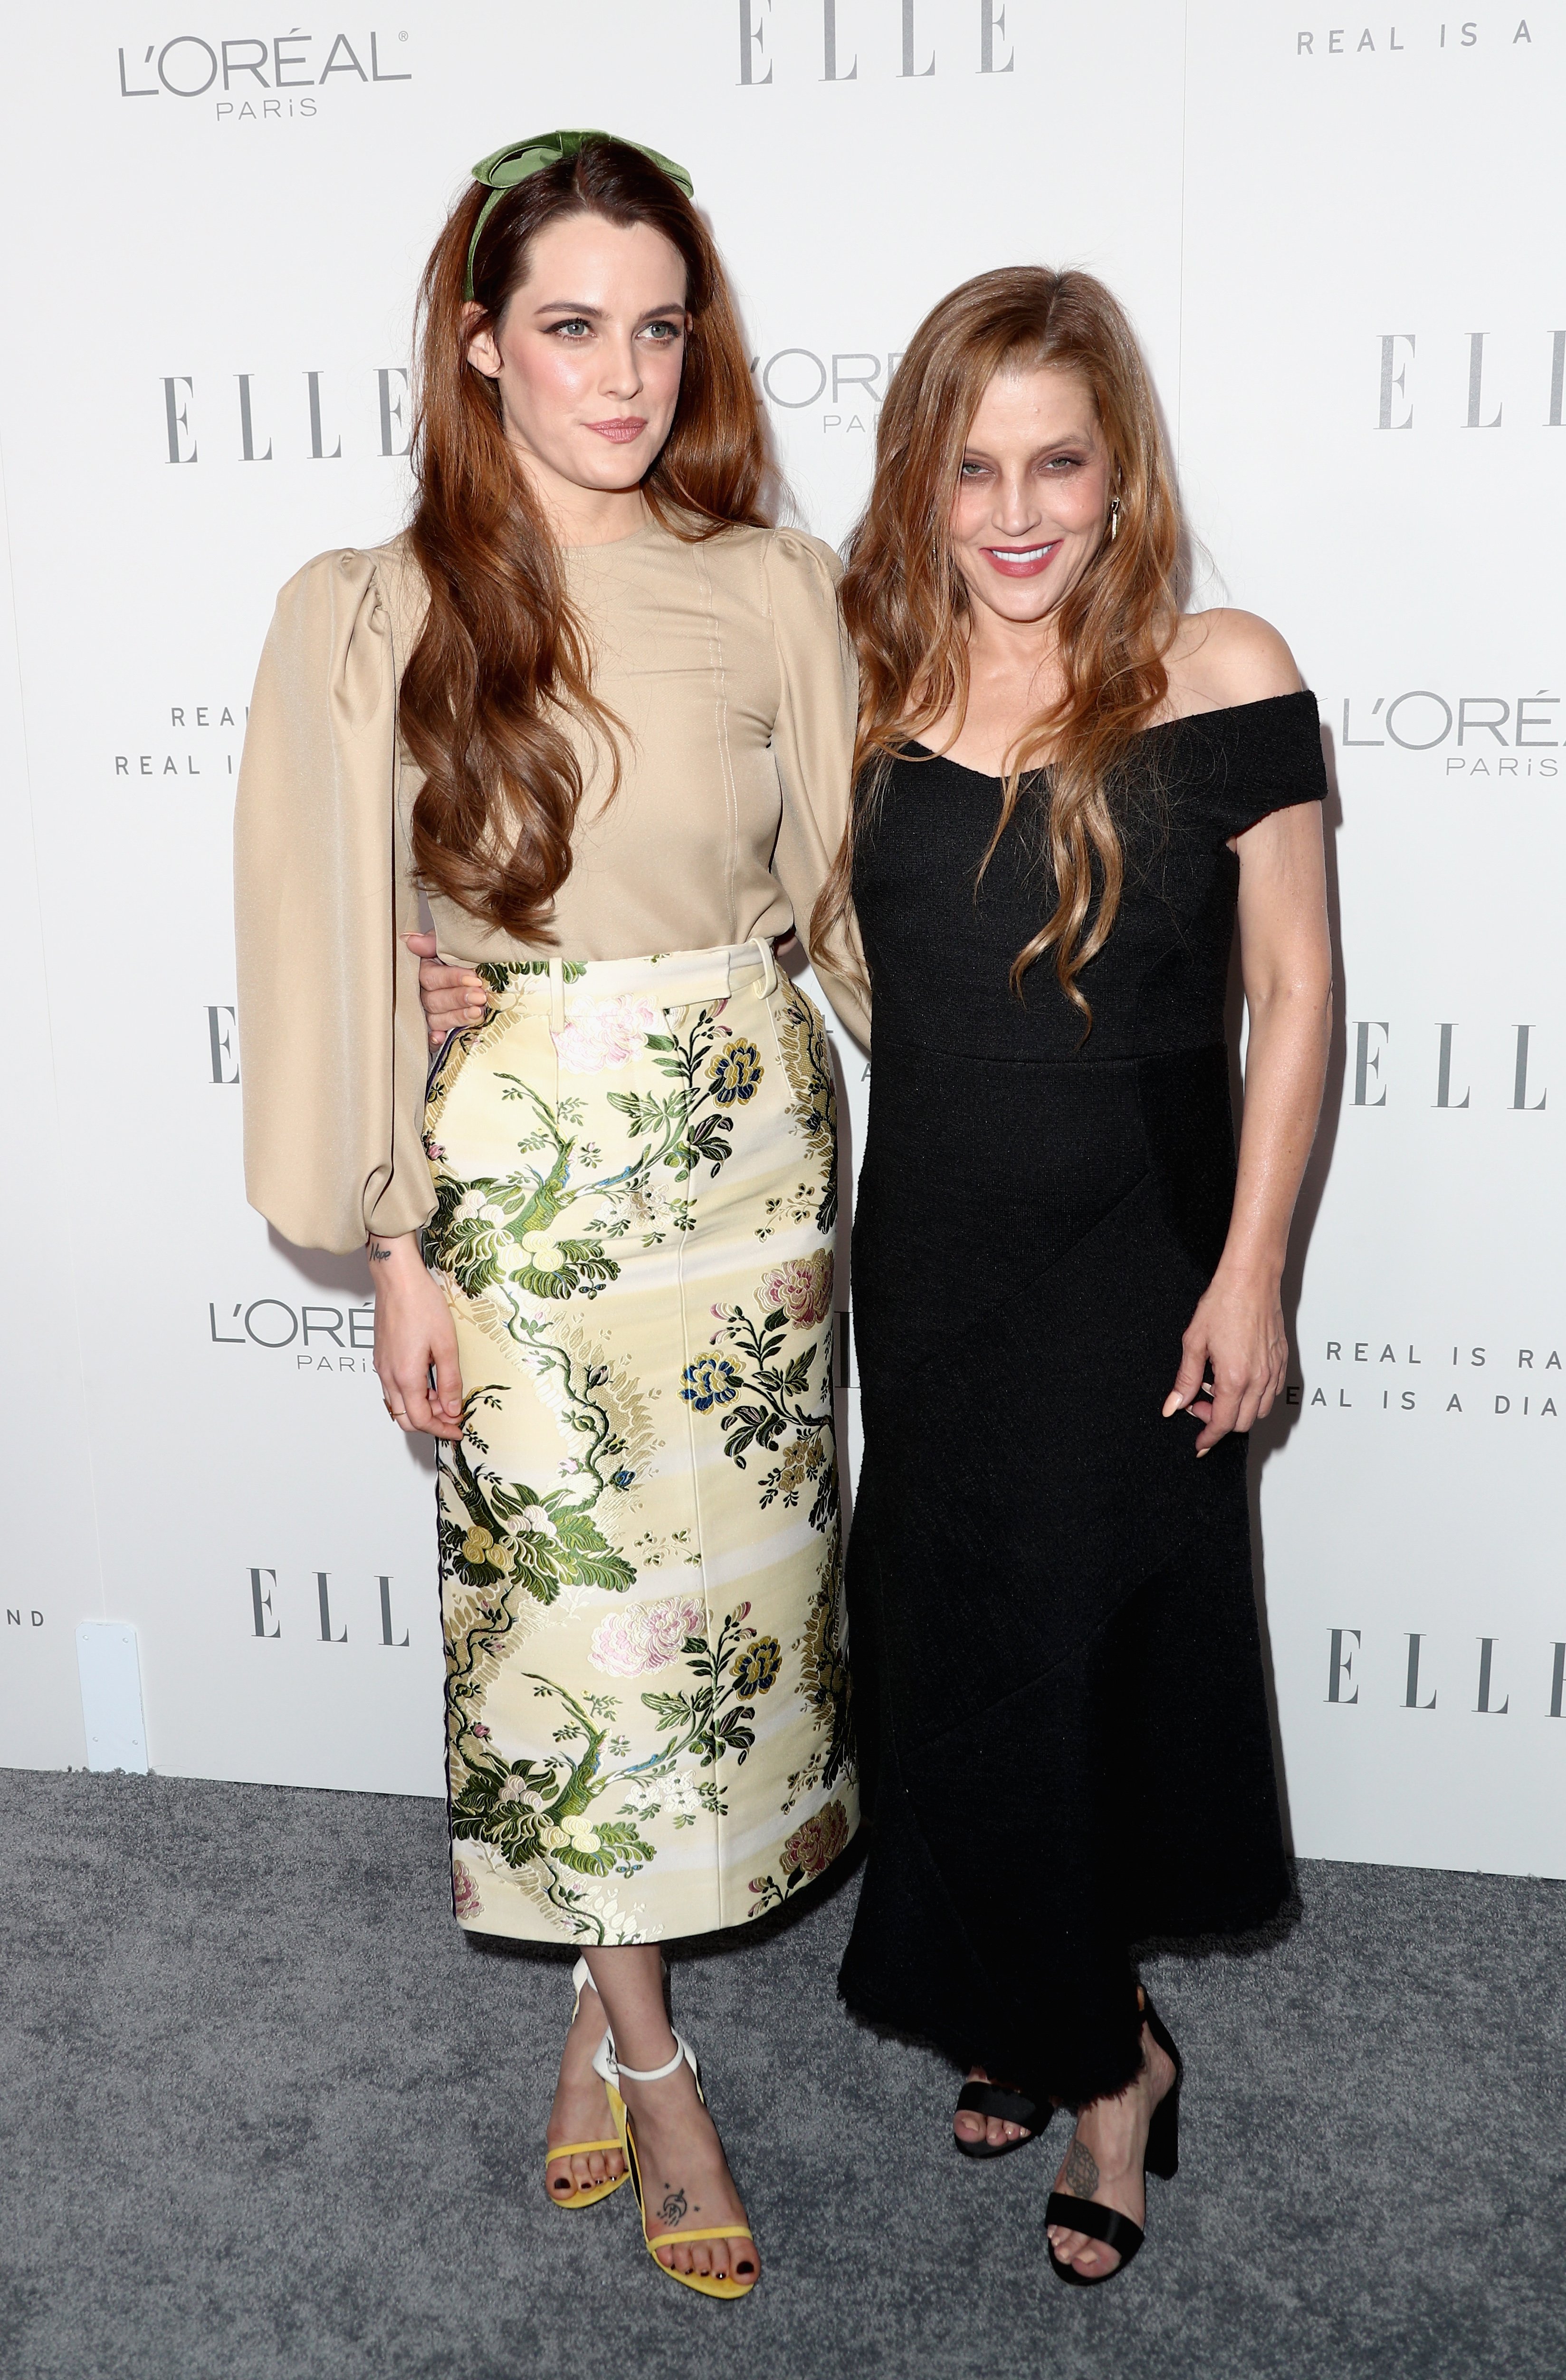 Riley Keough and her mother Lisa Marie Presley. | Source: Getty Images